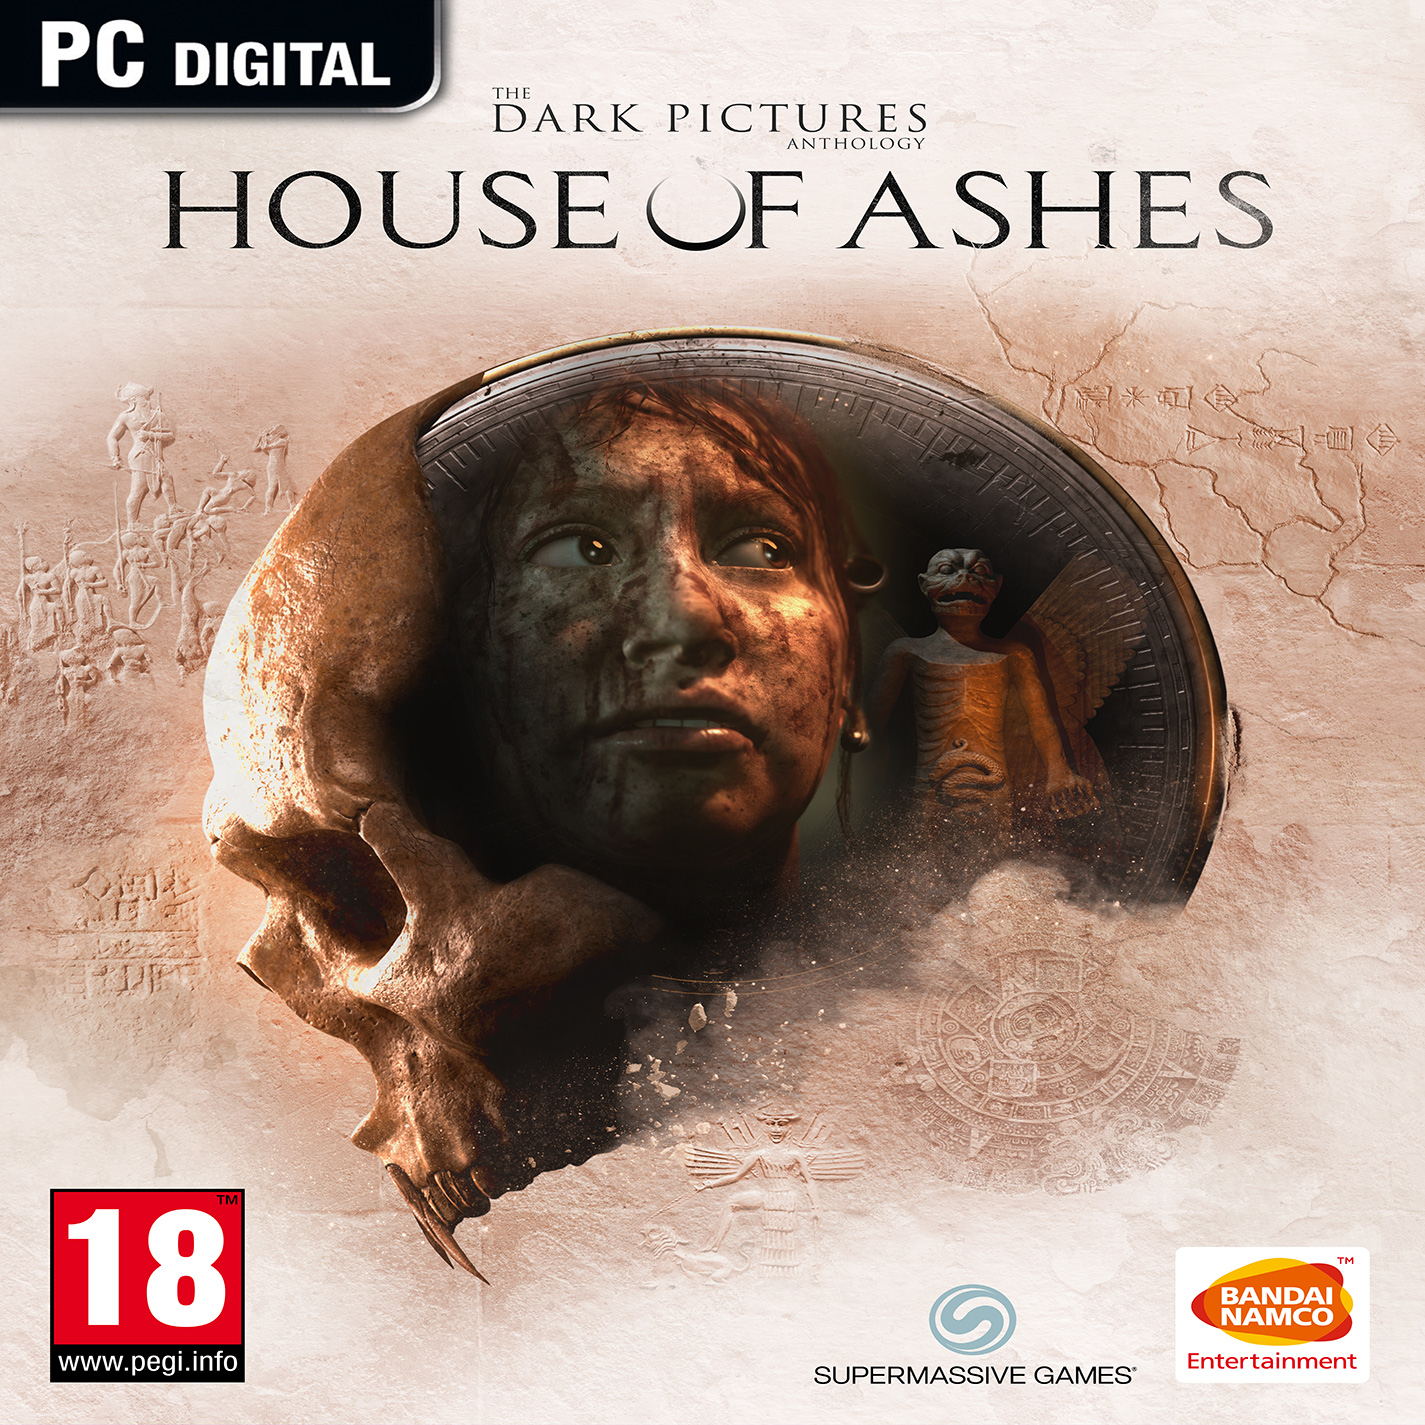 The Dark Pictures Anthology: House of Ashes - pedn CD obal